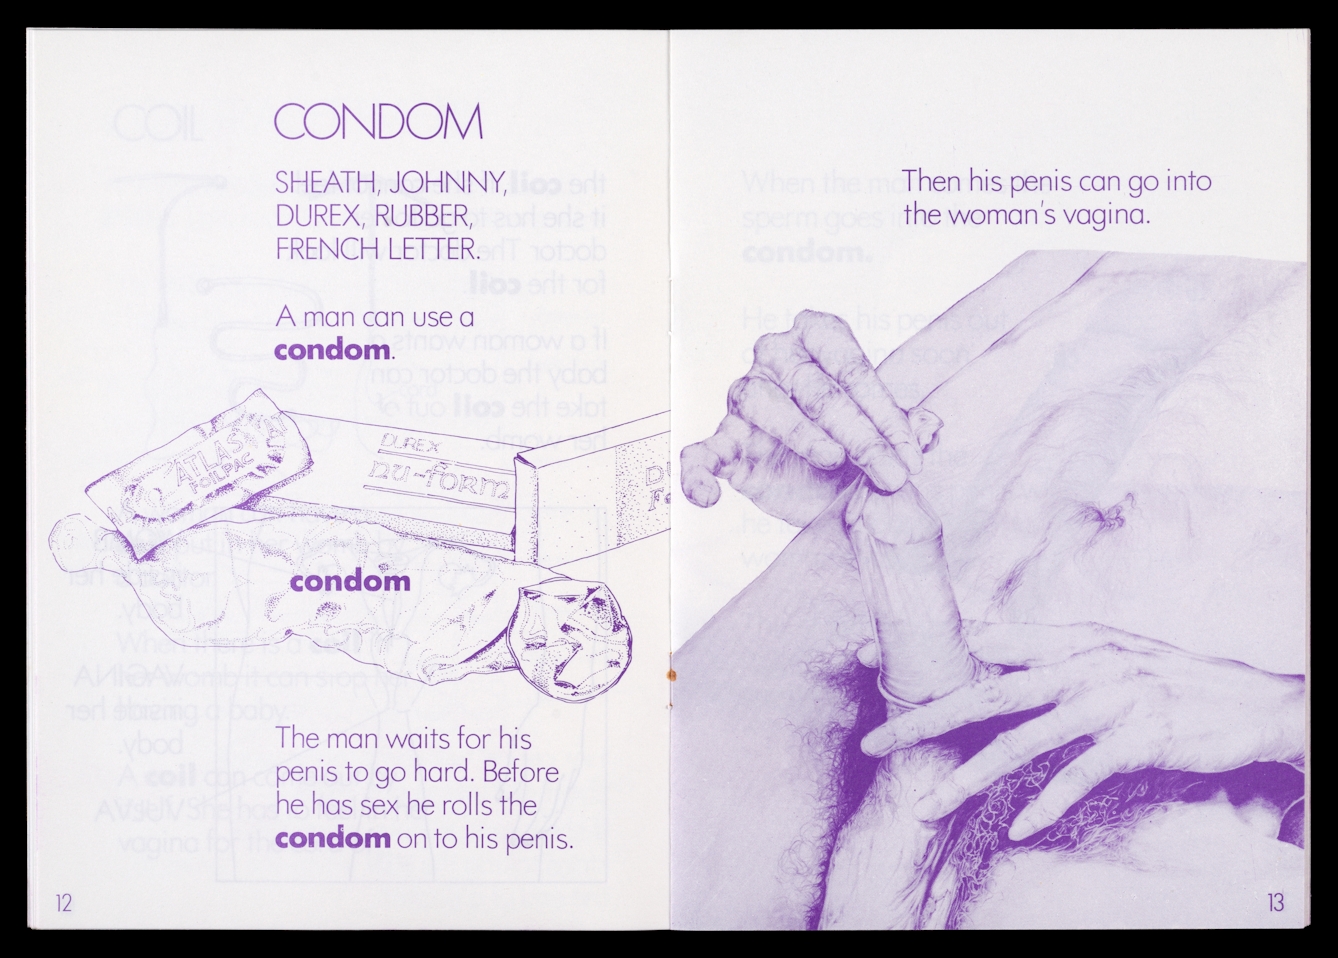 Photograph of archive material from the 1980s against a black background. The image shows an open double page spread of an information booklet which contains purple coloured typed text and a purple tinted drawing. On the left hand page are the title words, 'Condom, sheath, Johnny,Durex, rubber, French letter. A man can use a condom.' Under these words are a drawing of condom, its foil packed and cardboard box. Under the drawing are the words 'The man waits for his penis to go hard. Before he has sex he rolls the condom onto his penis'. On the right hand page are the words 'The his penis can go into the woman's vagina.' Under this text is a large drawing of the torso of a naked man. He is pictured in the process of putting a condom onto his erect penis.